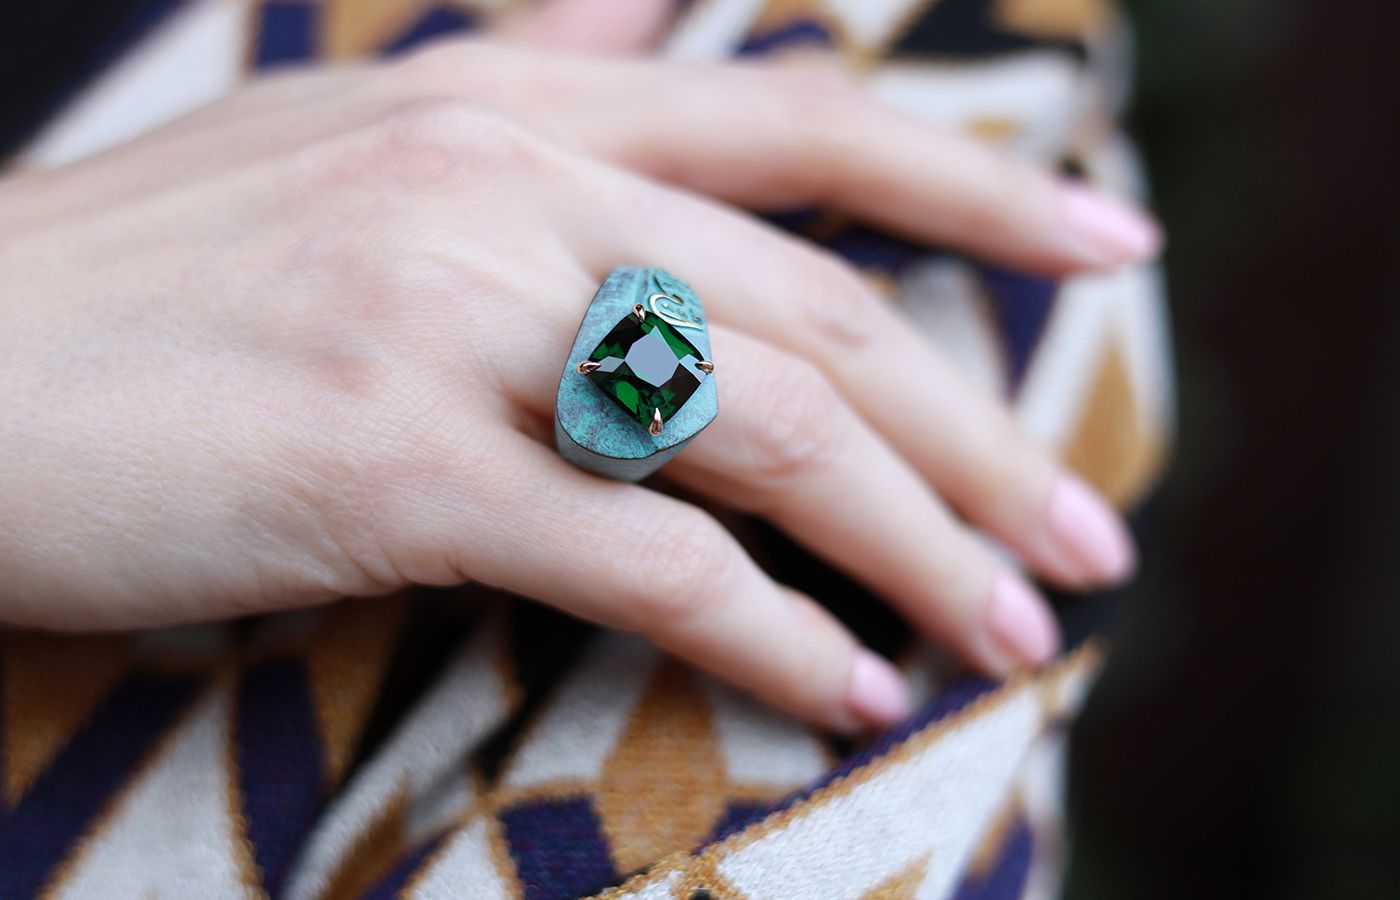 Philippe Guilhem Vya ring with an 8.35 carat tsavorite and Arabic script in patinated bronze and rose gold from the Mashandy Origyne collection